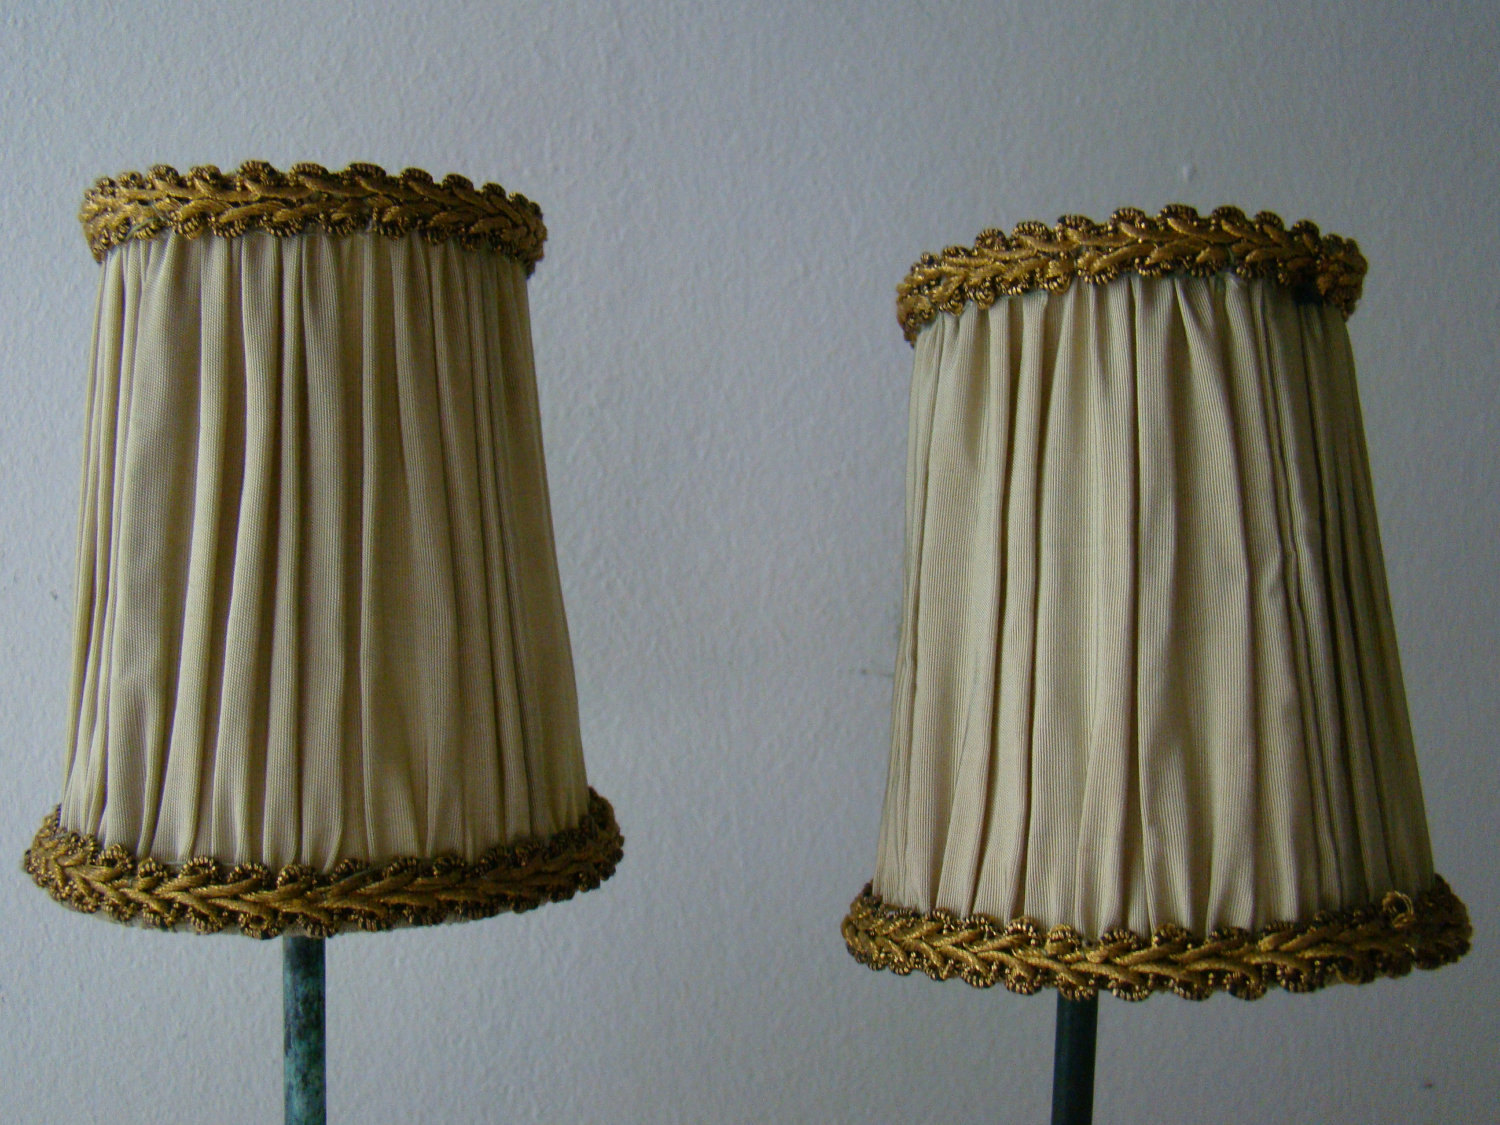 Miniature Lamp Shades on Miniature Lamp Shades Vintage French Sage Green And By Joellecutro